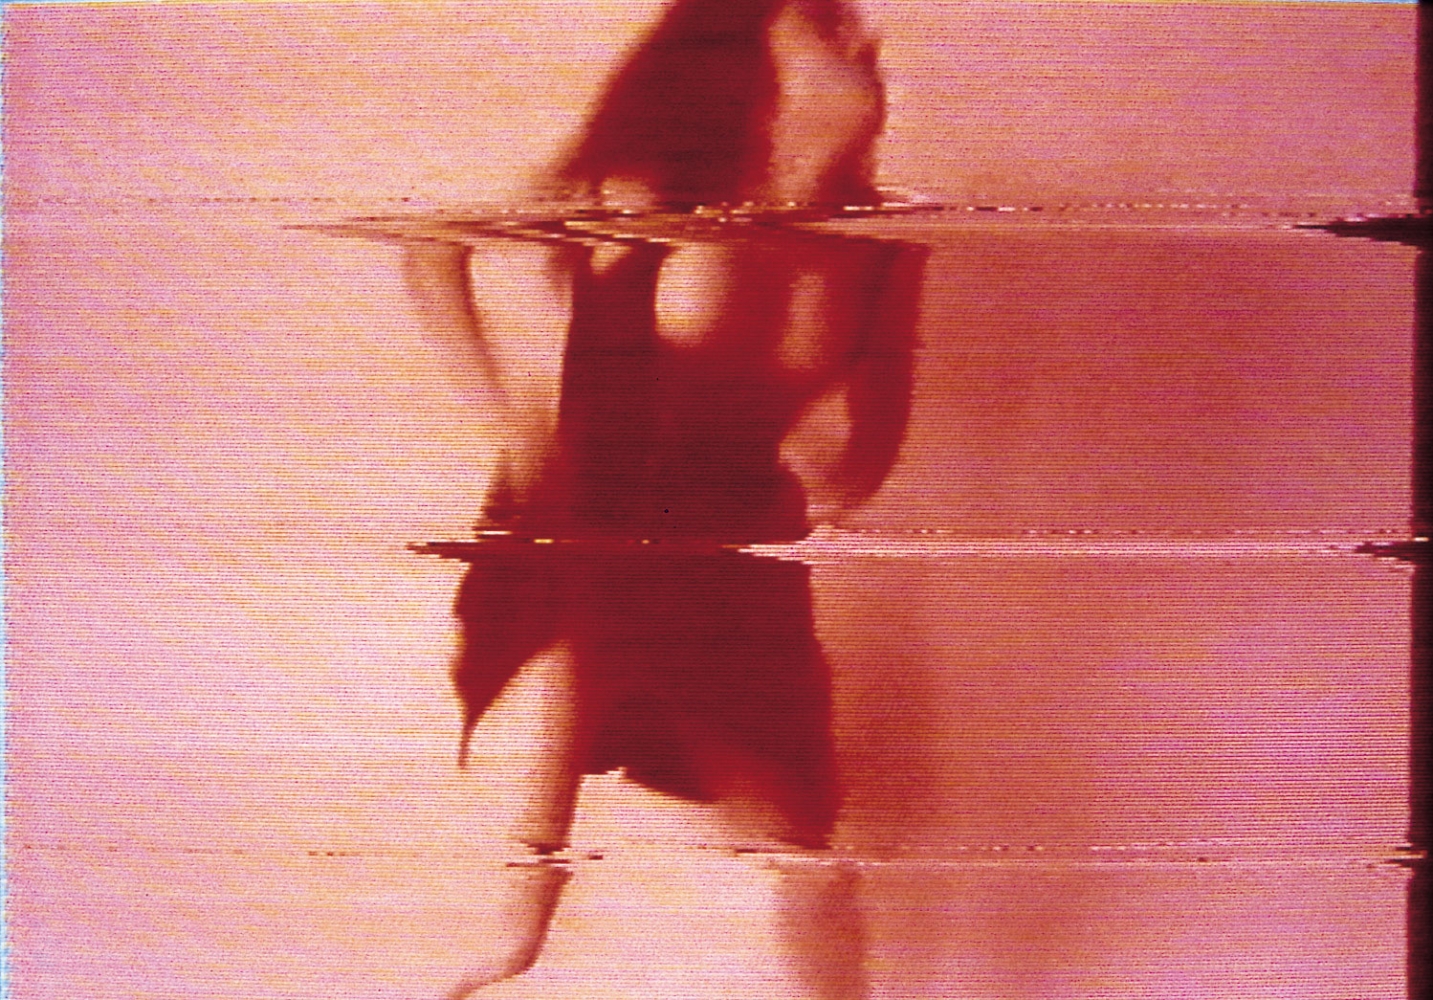 Pipilotti Rist
I&amp;#39;m Not The Girl Who Misses Much, 1986
Single-channel video, sound
Duration: 5 minutes